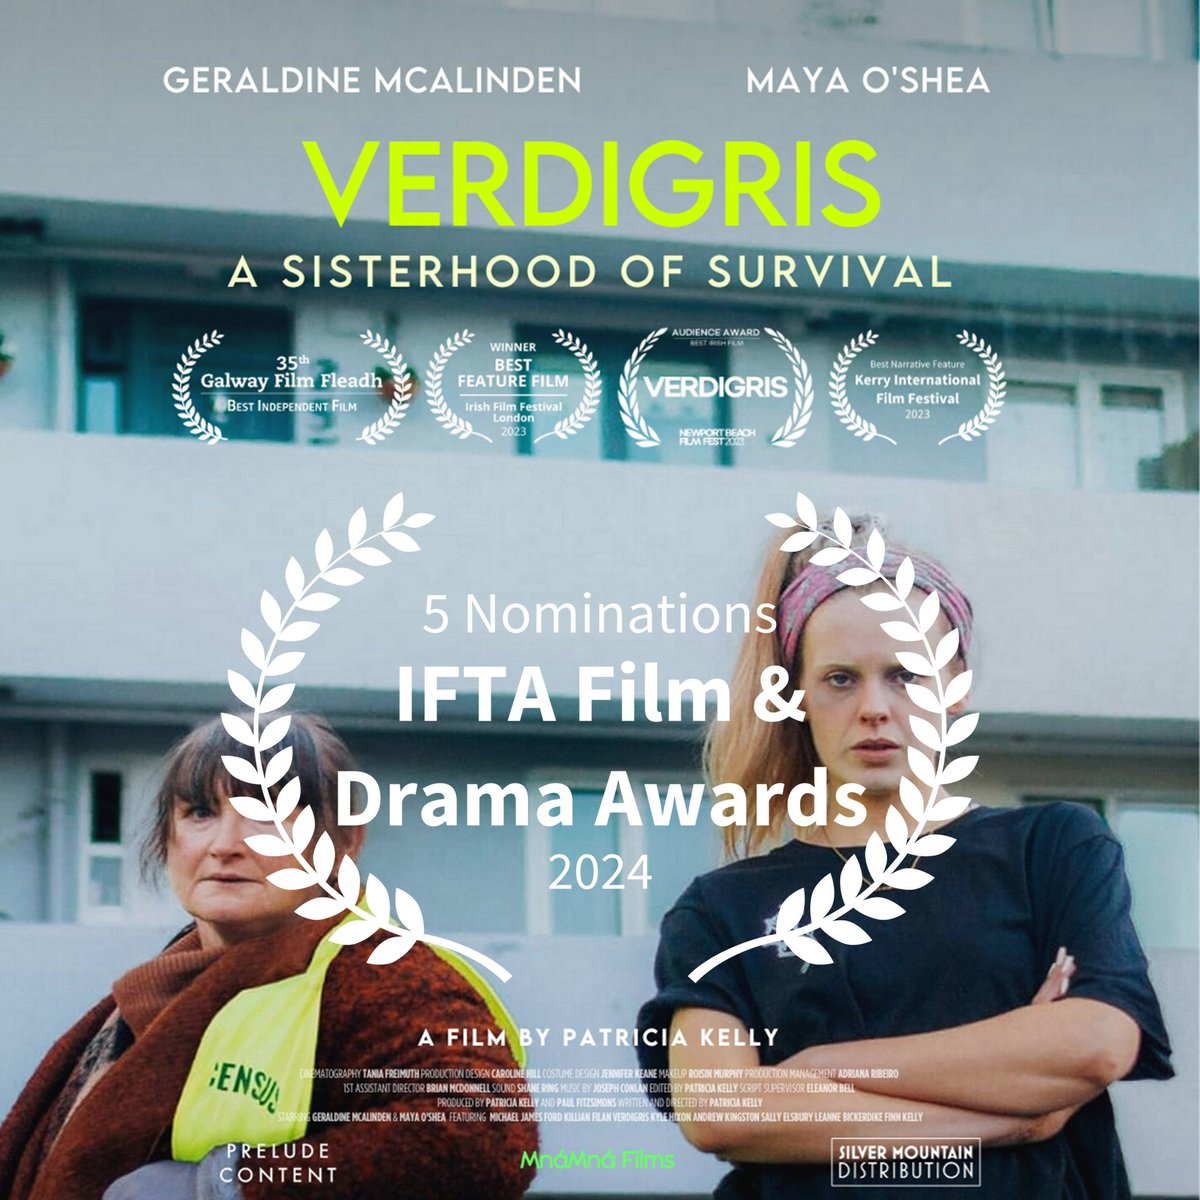 Delighted that @VerdigrisFilm has been nominated for 5 @IFTA  #iftaawards - Best Film, Best Lead Actress Film for @GeraldineMcAli1 Best Supporting Actress for Maya O’Shea, Best Director Film @PatriciaOLKelly & Best Script Film Patricia Kelly. @FilmsMna @iampaulfitzsimons